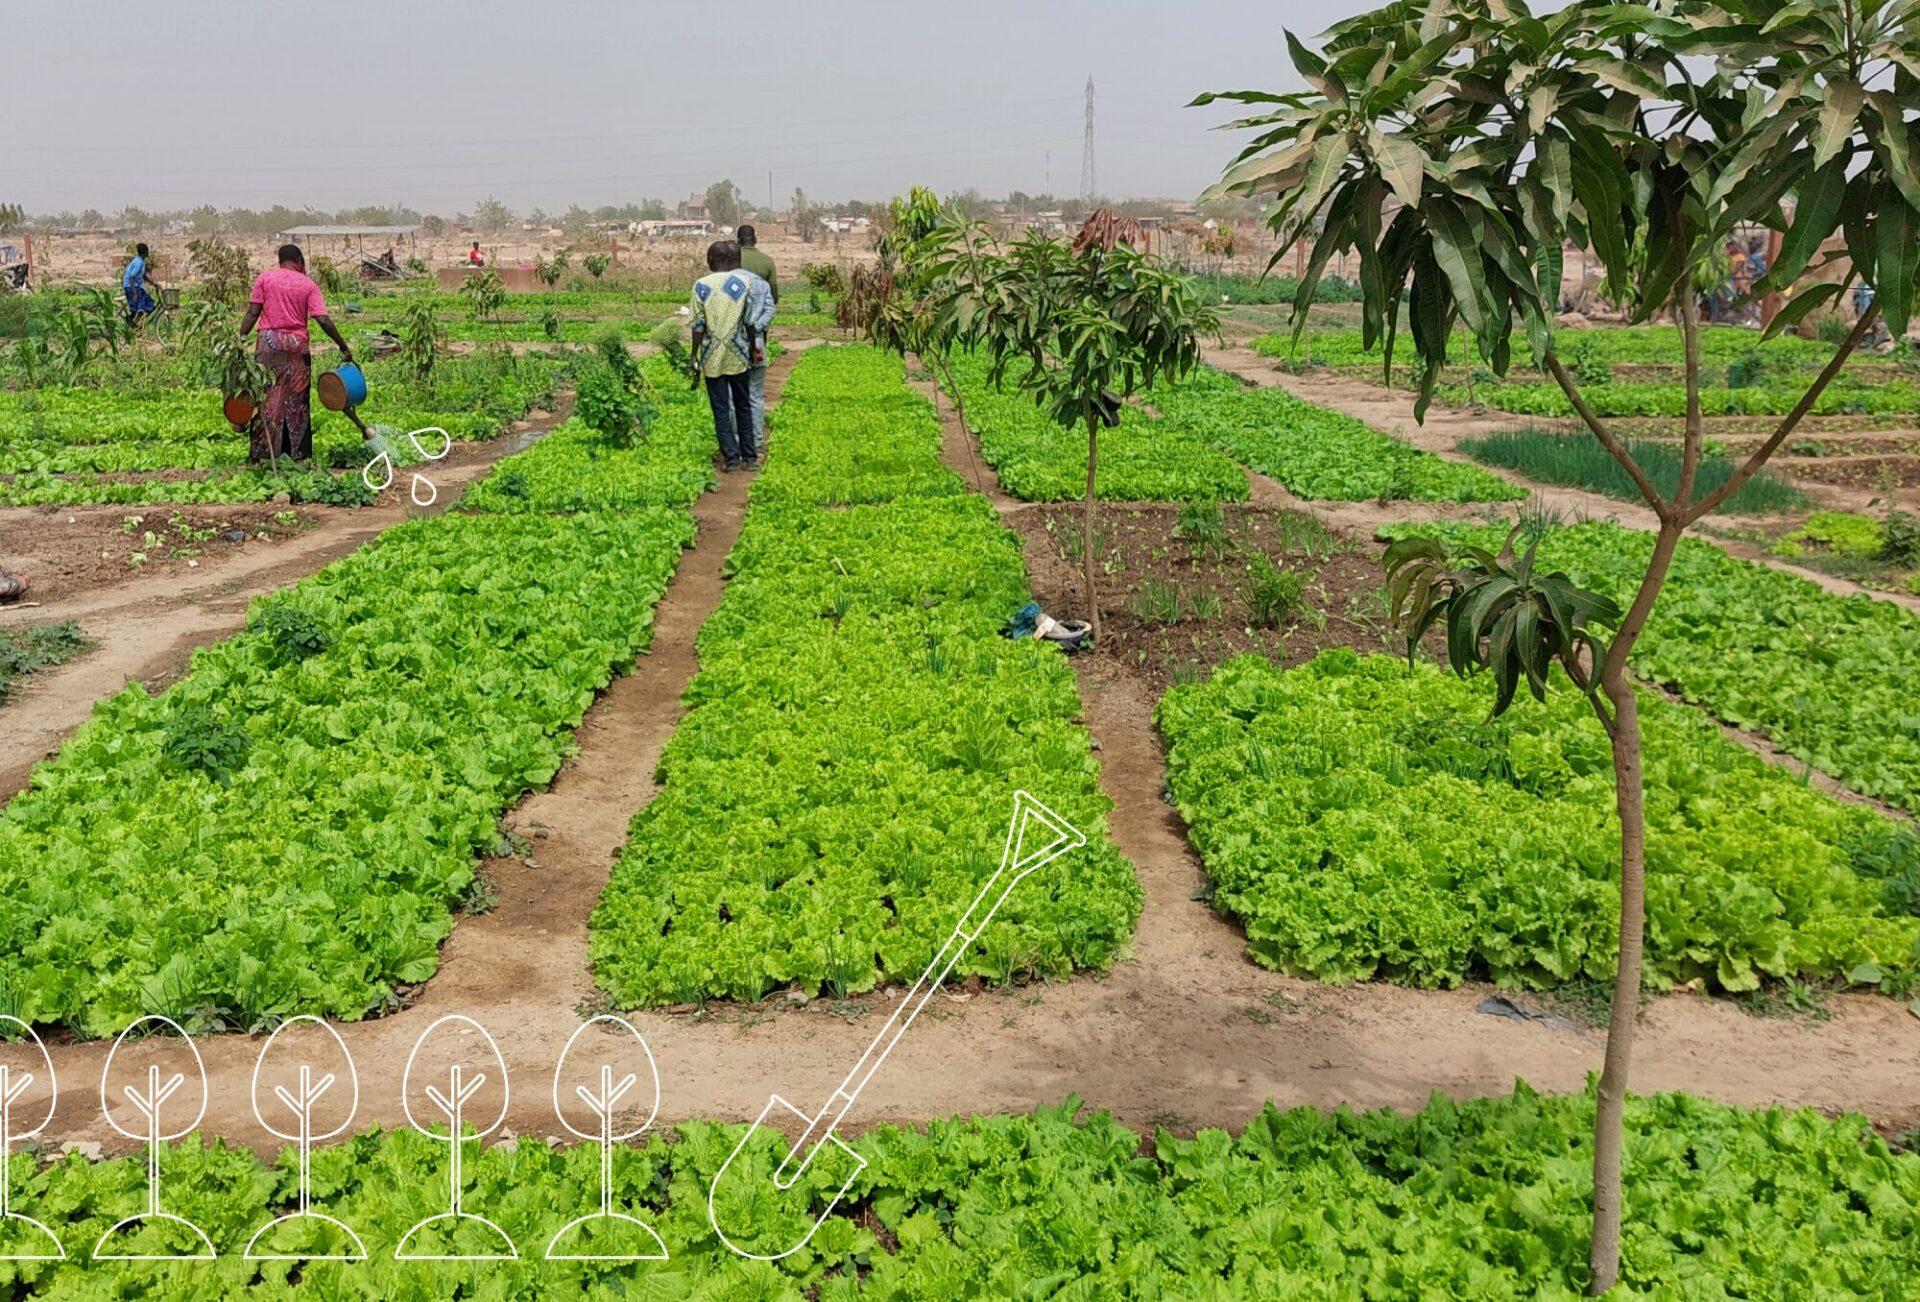 Community garden in Ouagadougou, Burkina Faso with green plantation sand trees in the foreground and 3 people taking care of the plants in the background